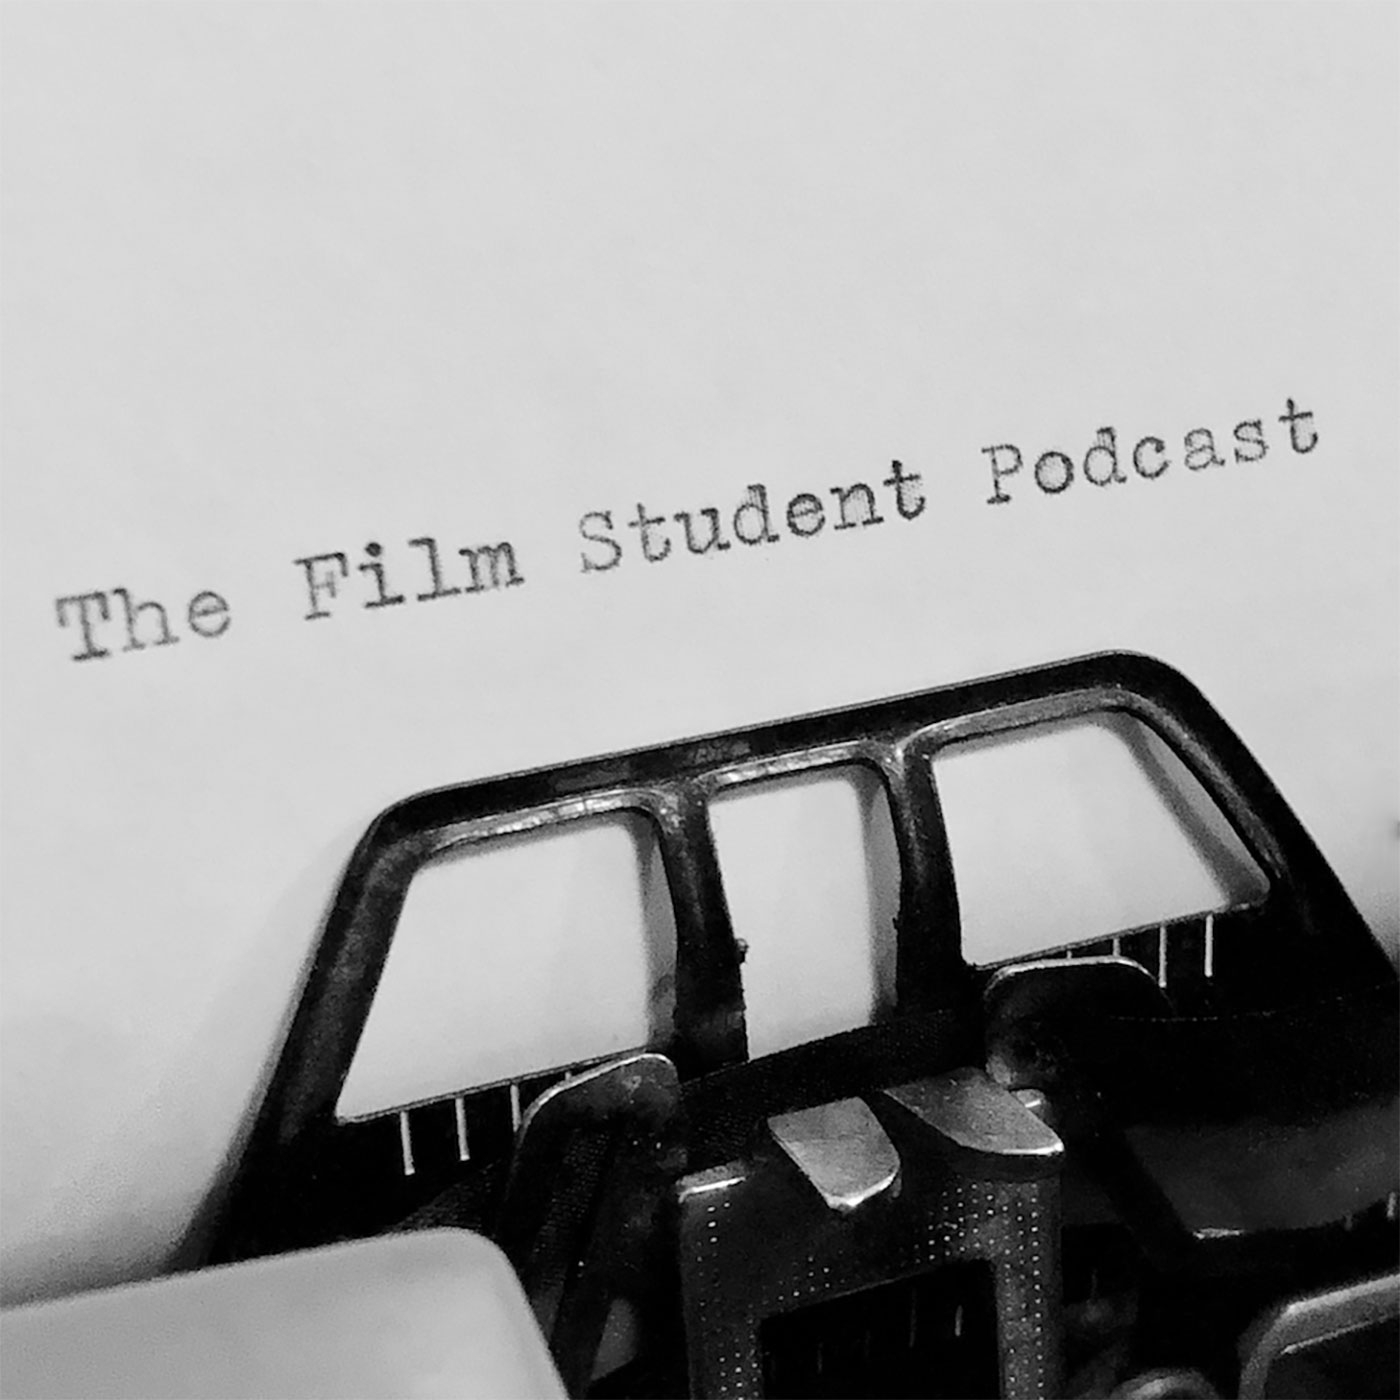 The Film Student Podcast